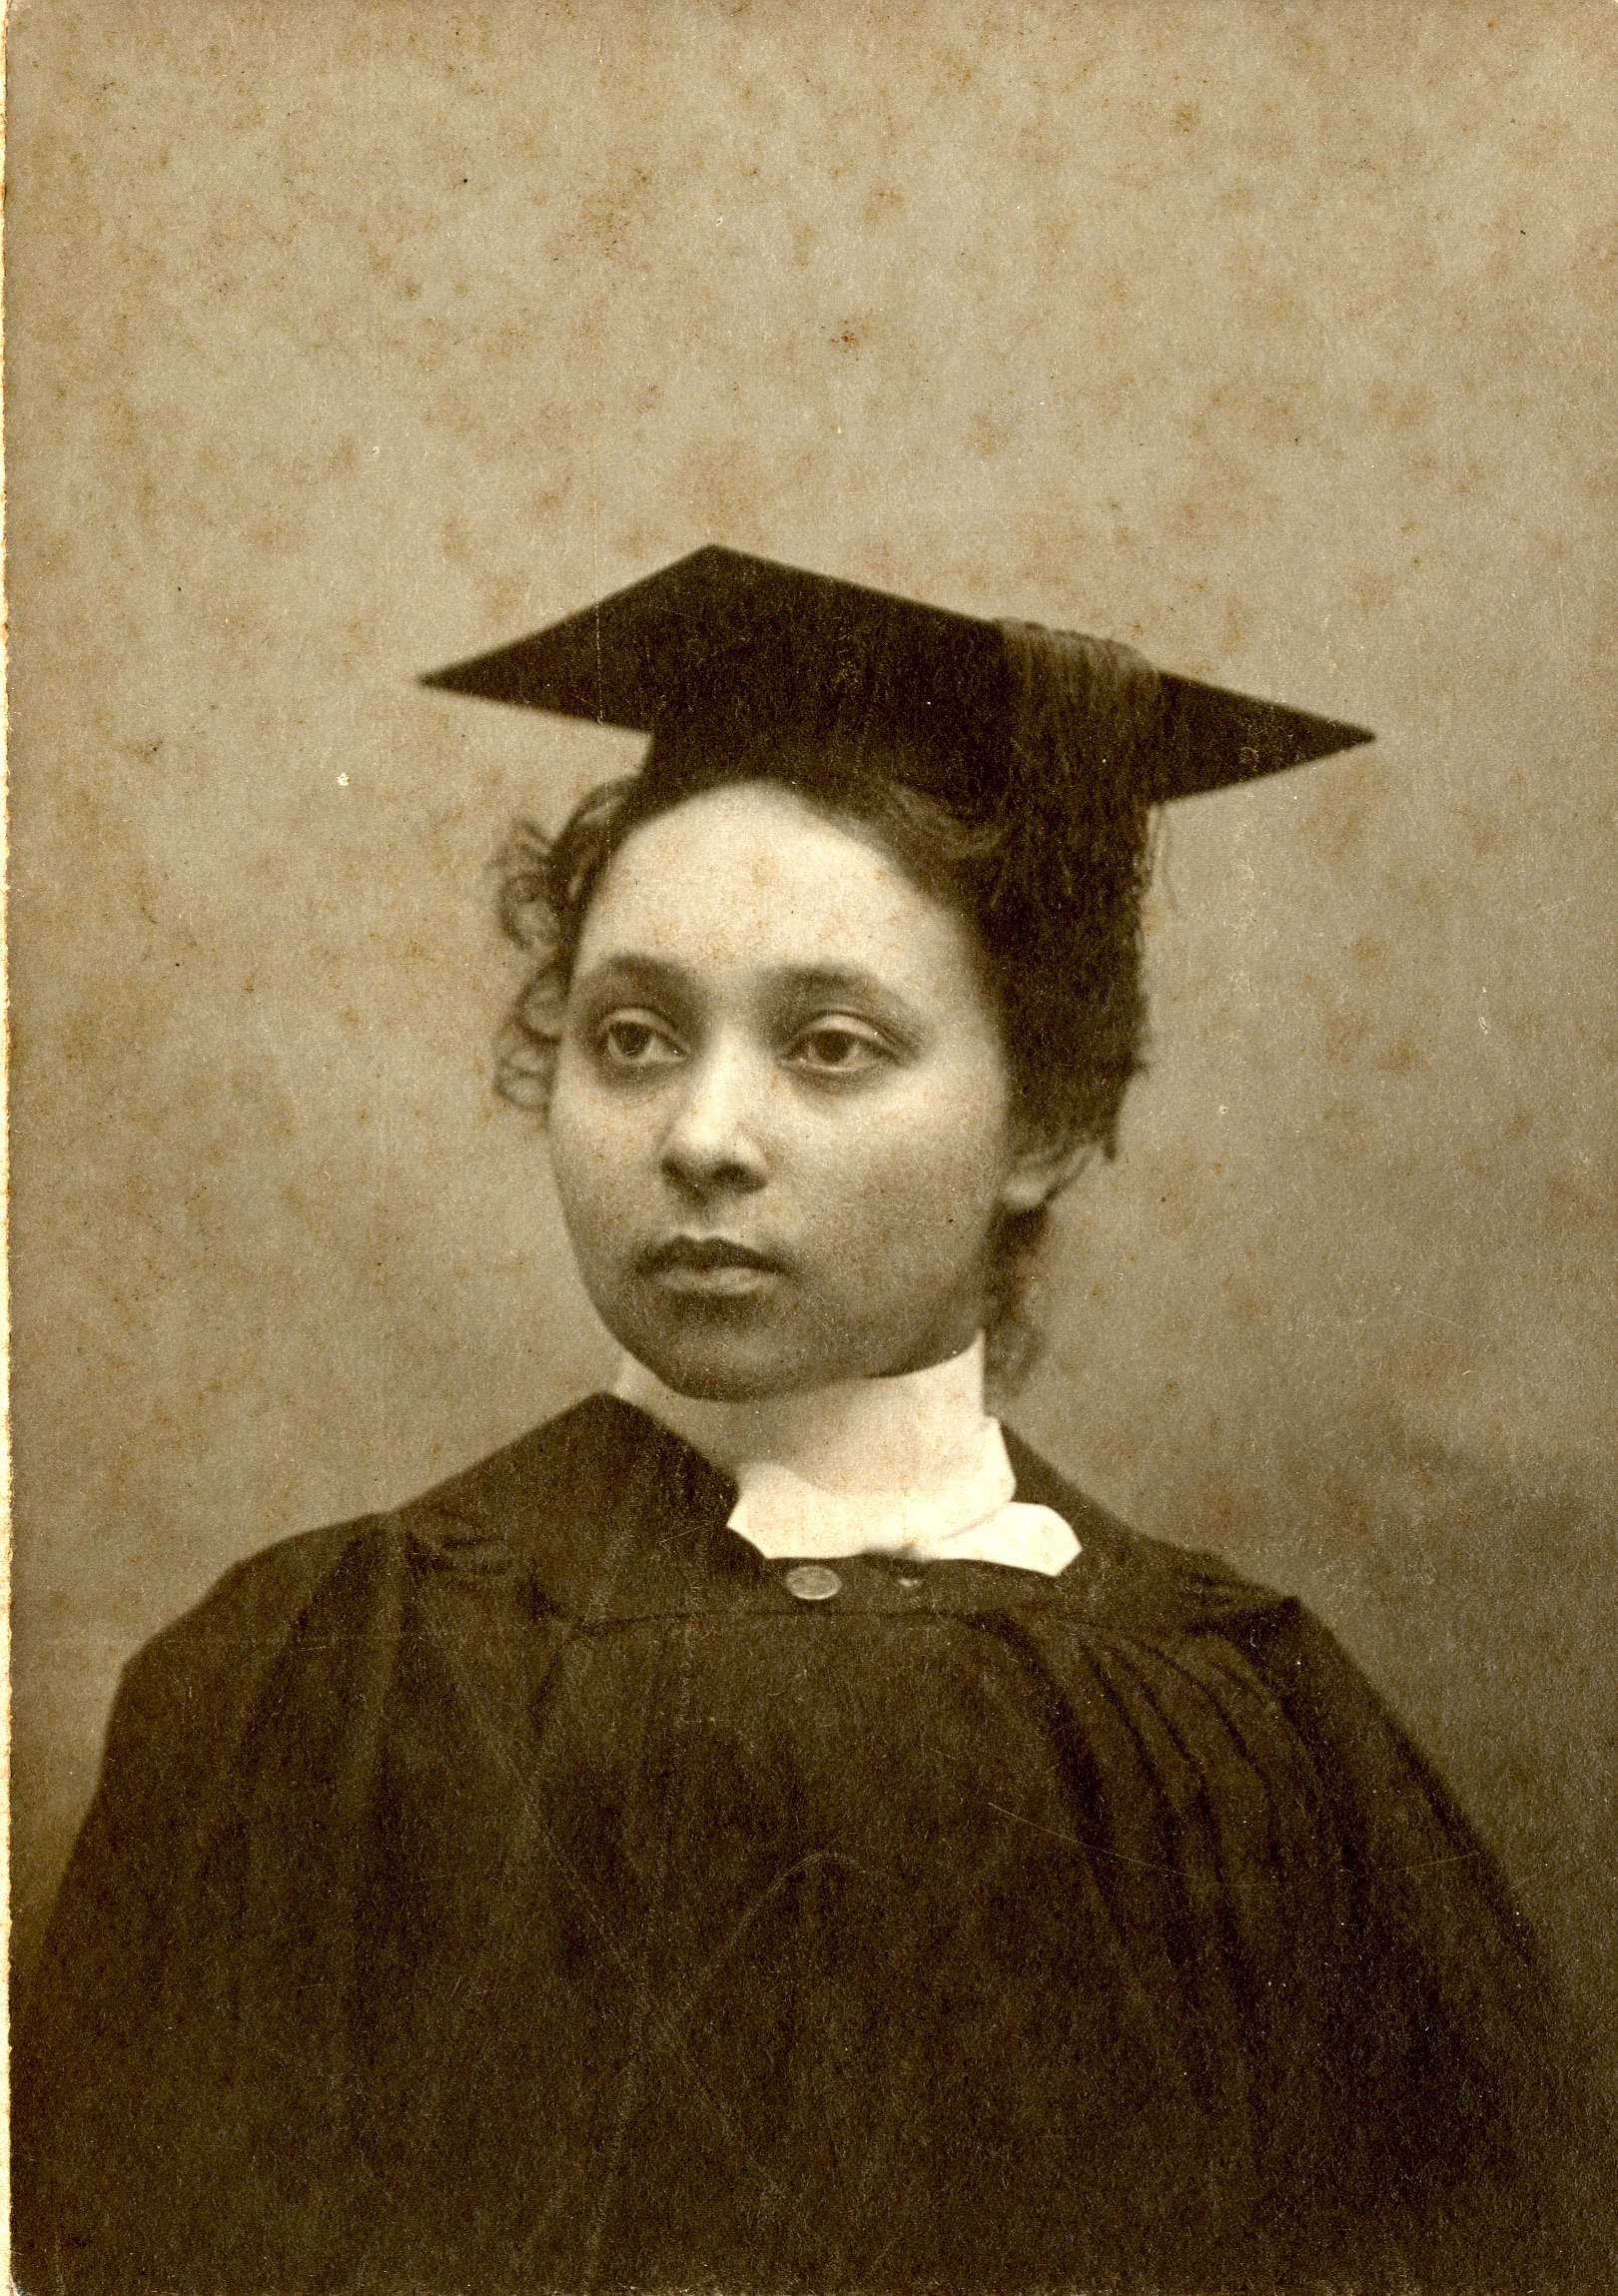 Mary Anderson 1899, Alumni Photo Files A9 1899-1890, Special Collections and Archives, Middlebury College